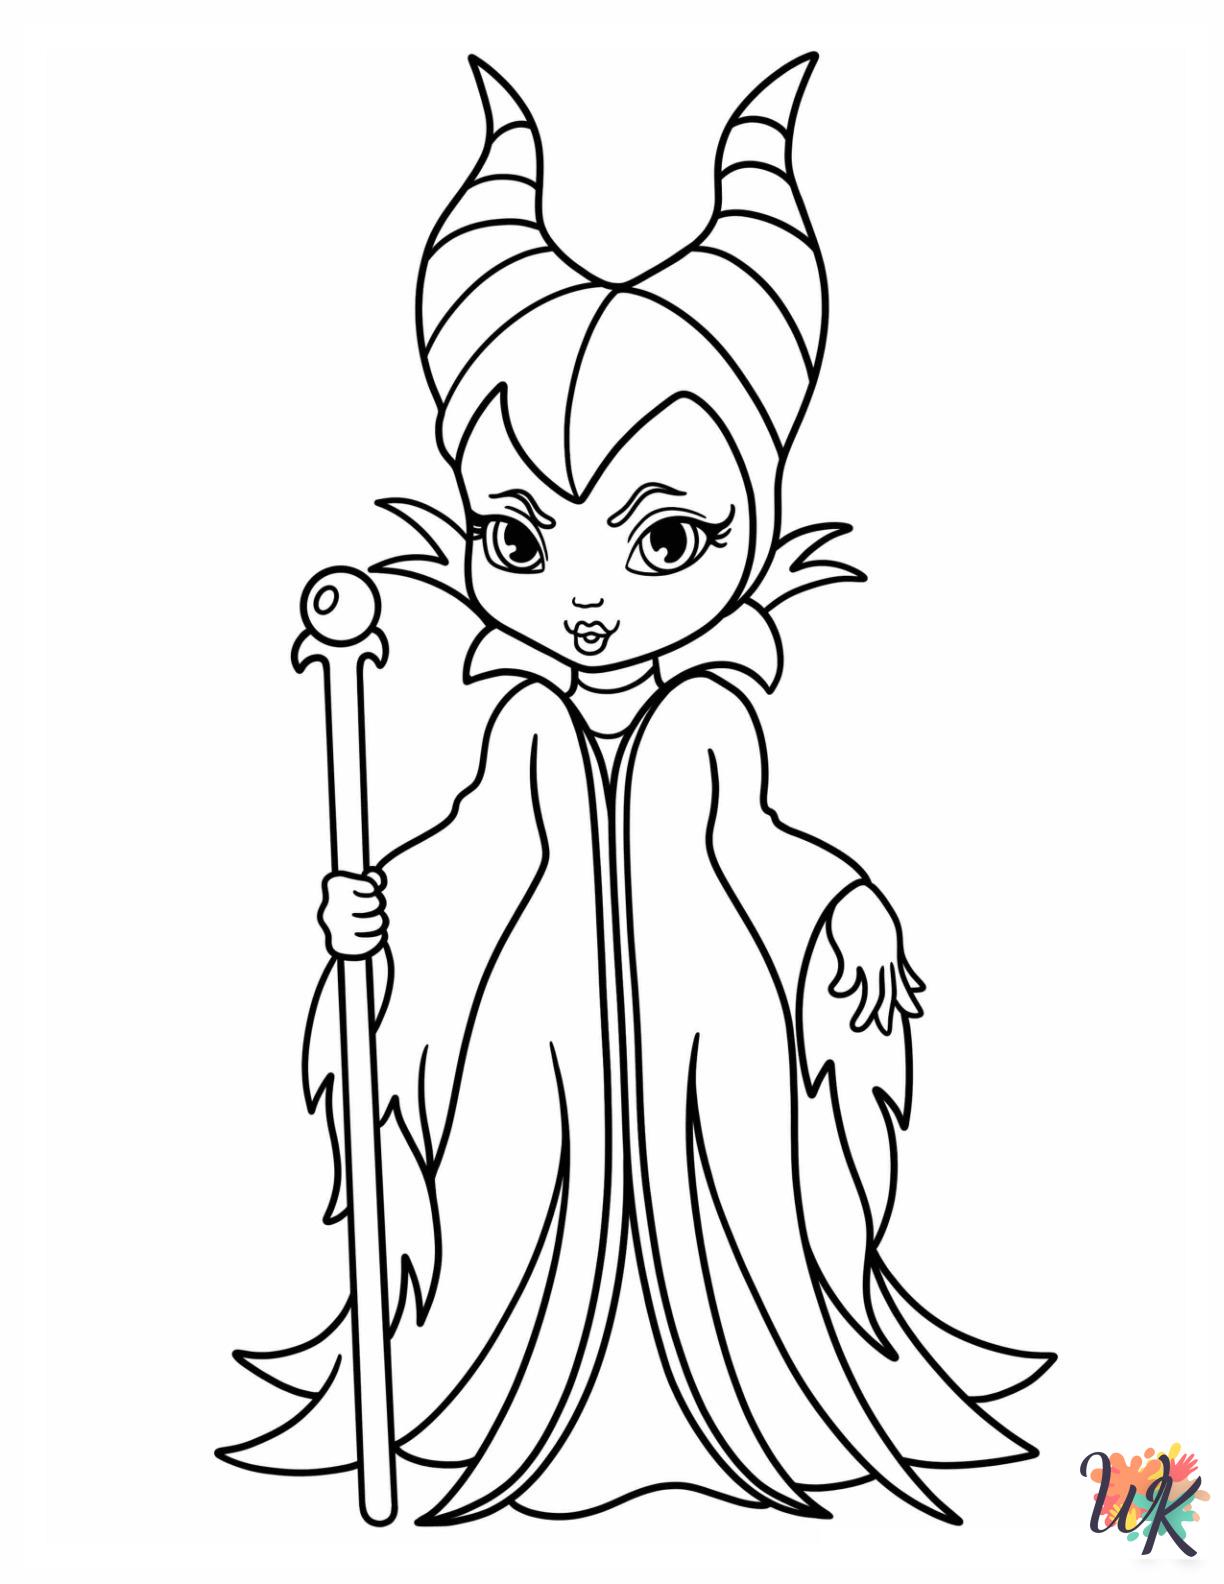 old-fashioned Maleficent coloring pages